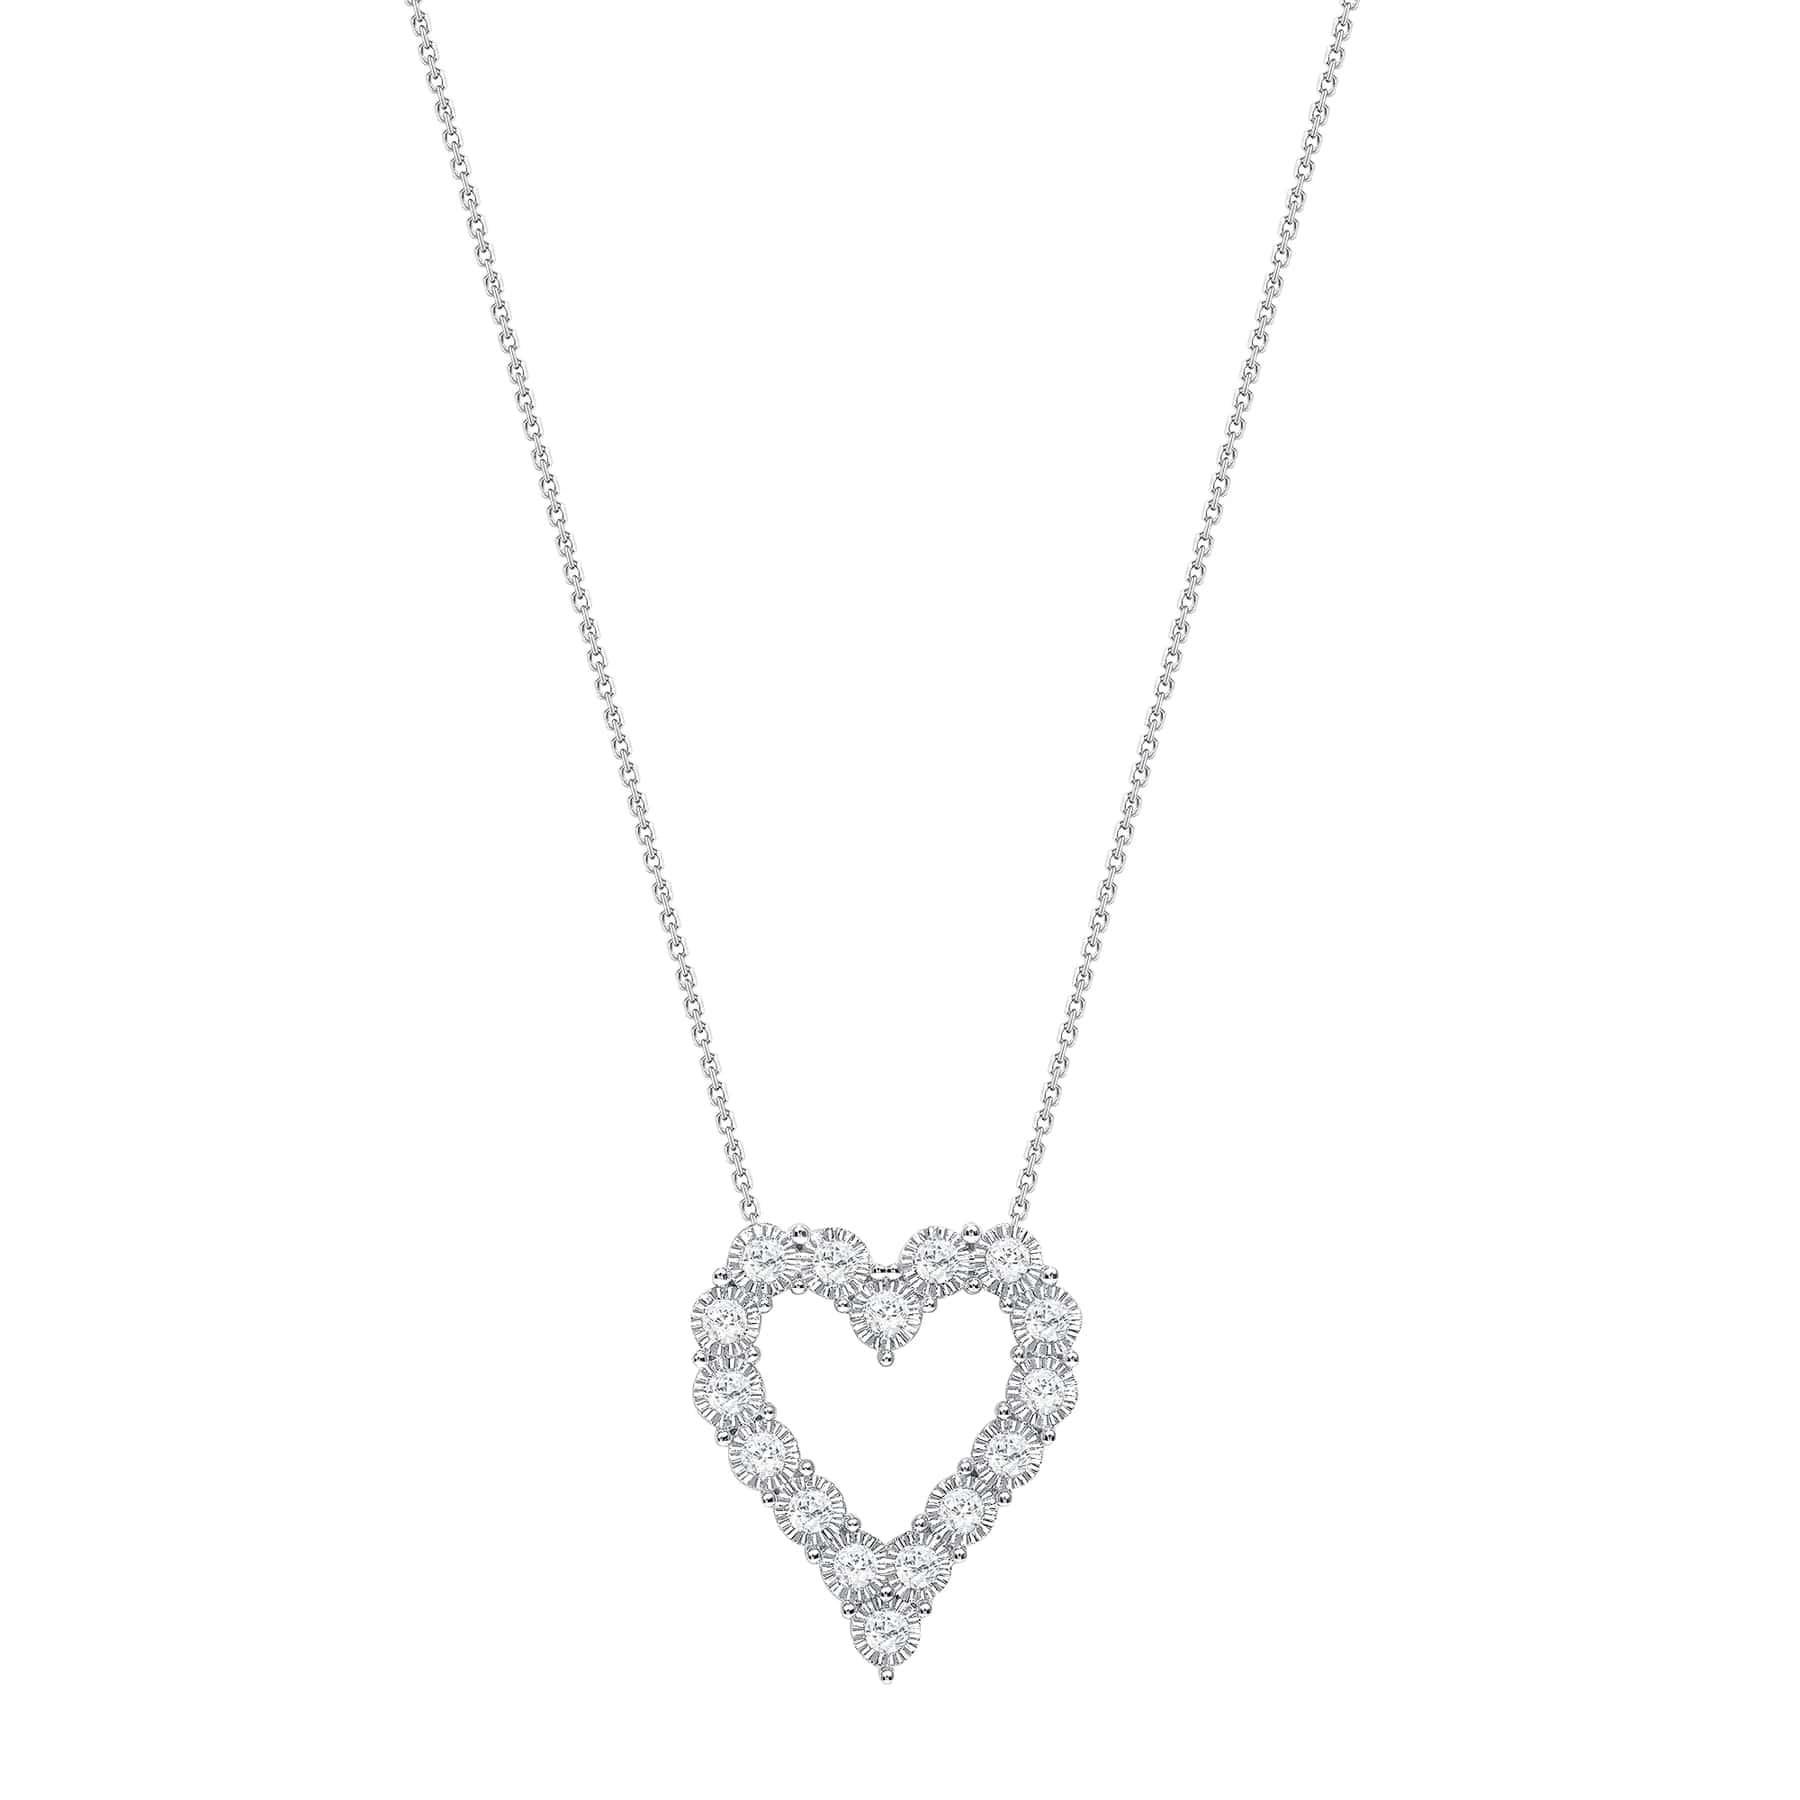 This Heart diamond necklace provides a cute and fashionable on trend look. 

Necklace Information 
Metal : 14k Gold
Diamond Cut : Round
Total Diamond Carats : 1ct
Diamond Clarity : VS -SI
Diamond Color : F
Necklace Length : 16 Inches
Color : White